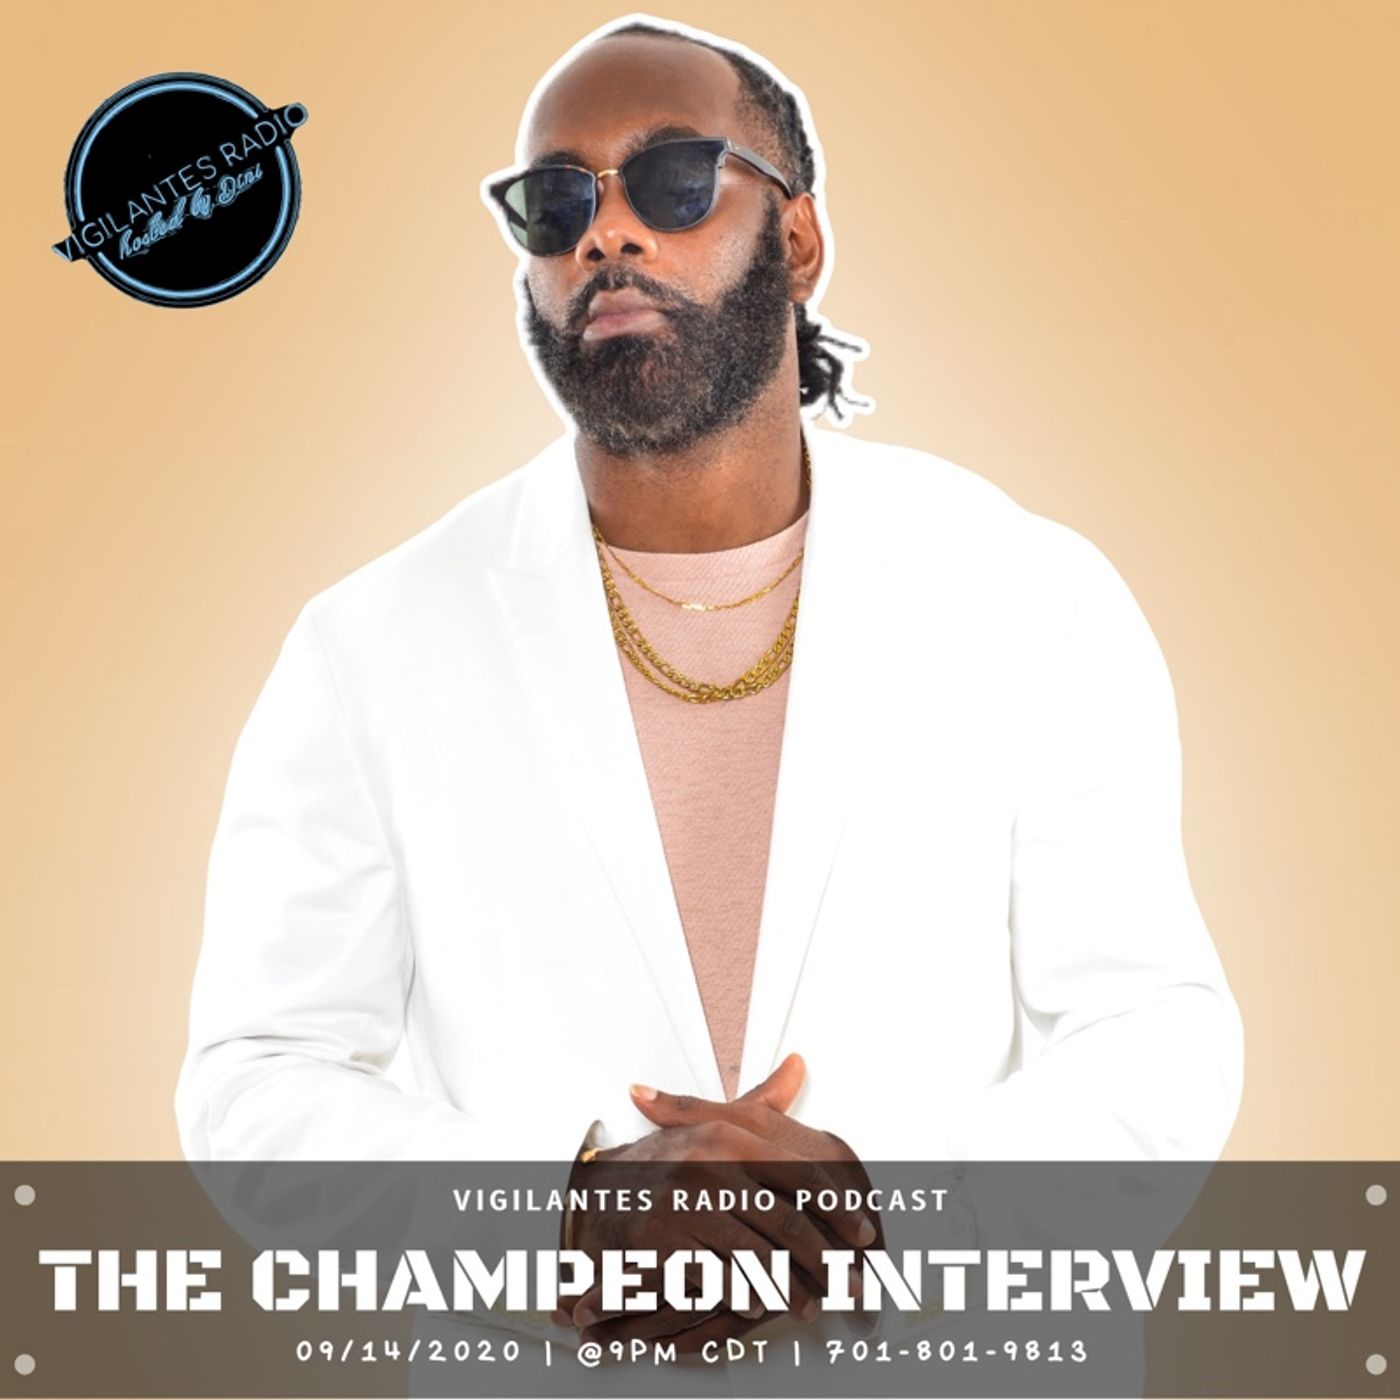 The Champeon Interview.